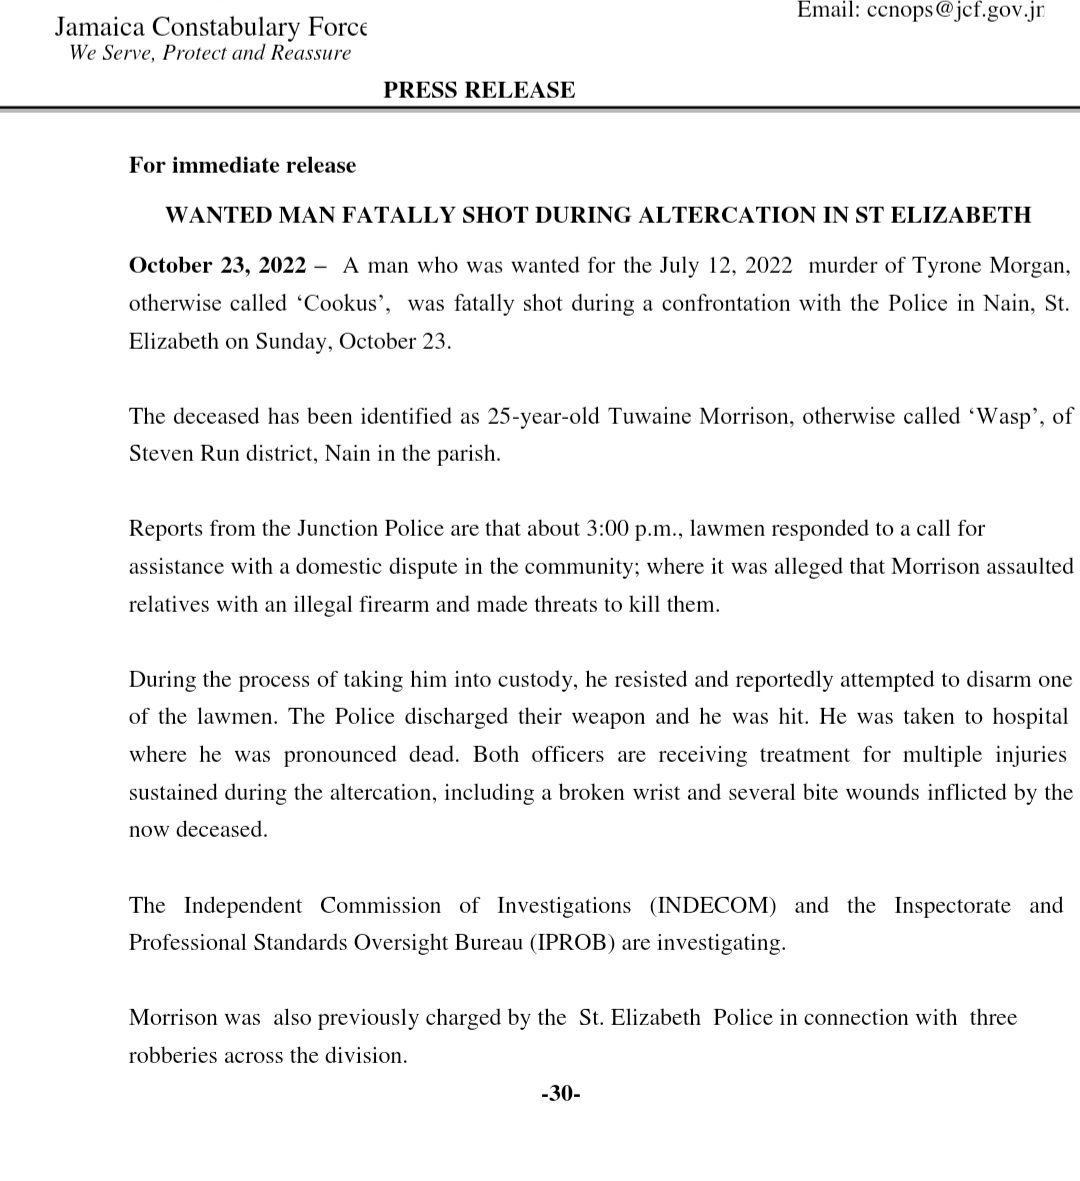 Statement from the Police on the shooting of 25 year old Tuwaine Morrison.